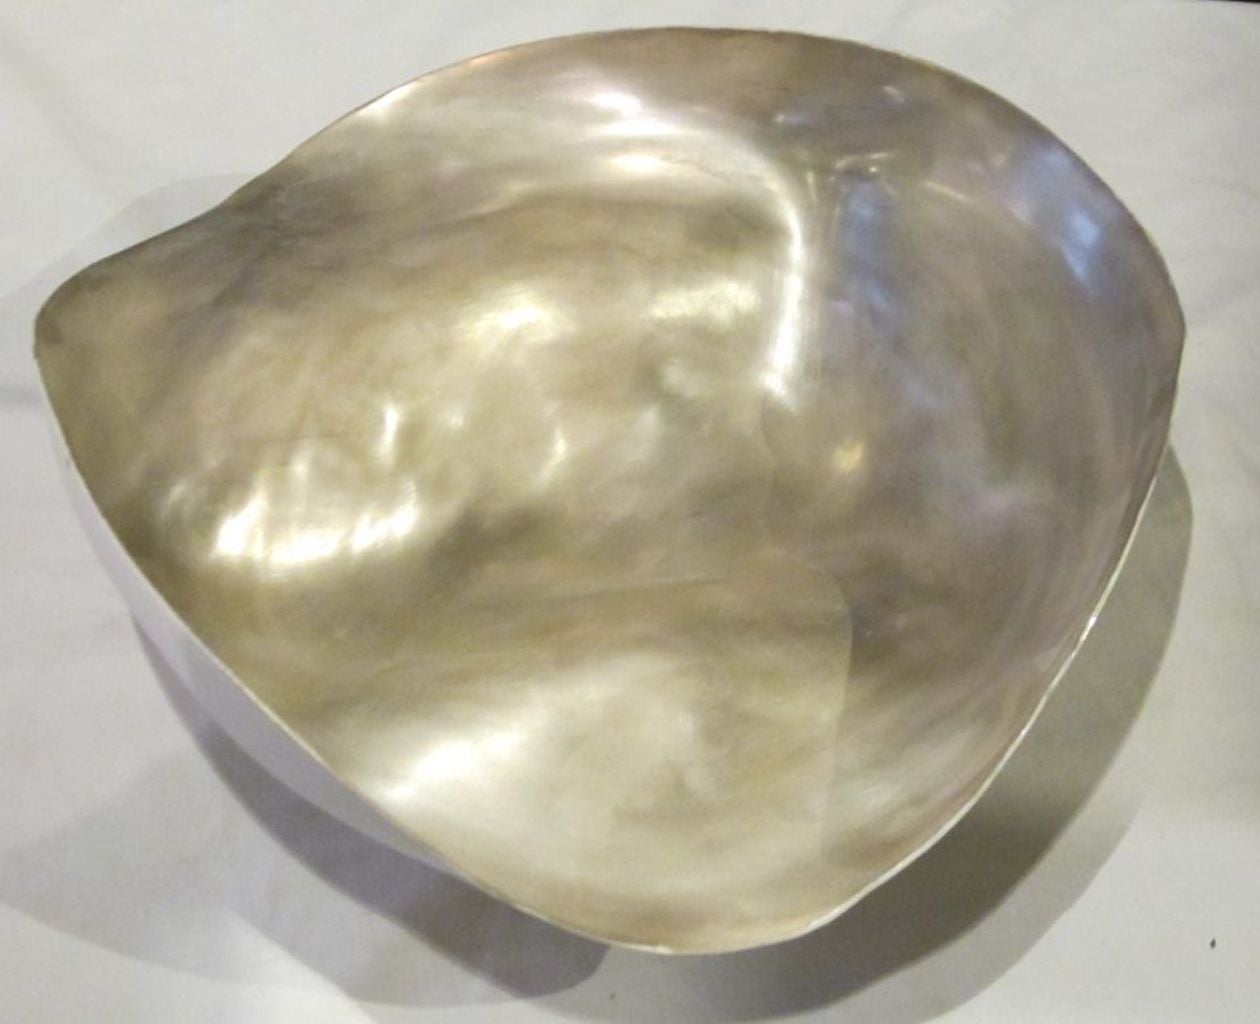 Italian handmade large silver leaf bowl in a freeform shape.
Silver leaf on cream fine ceramic.
Similar bowls are available in 7